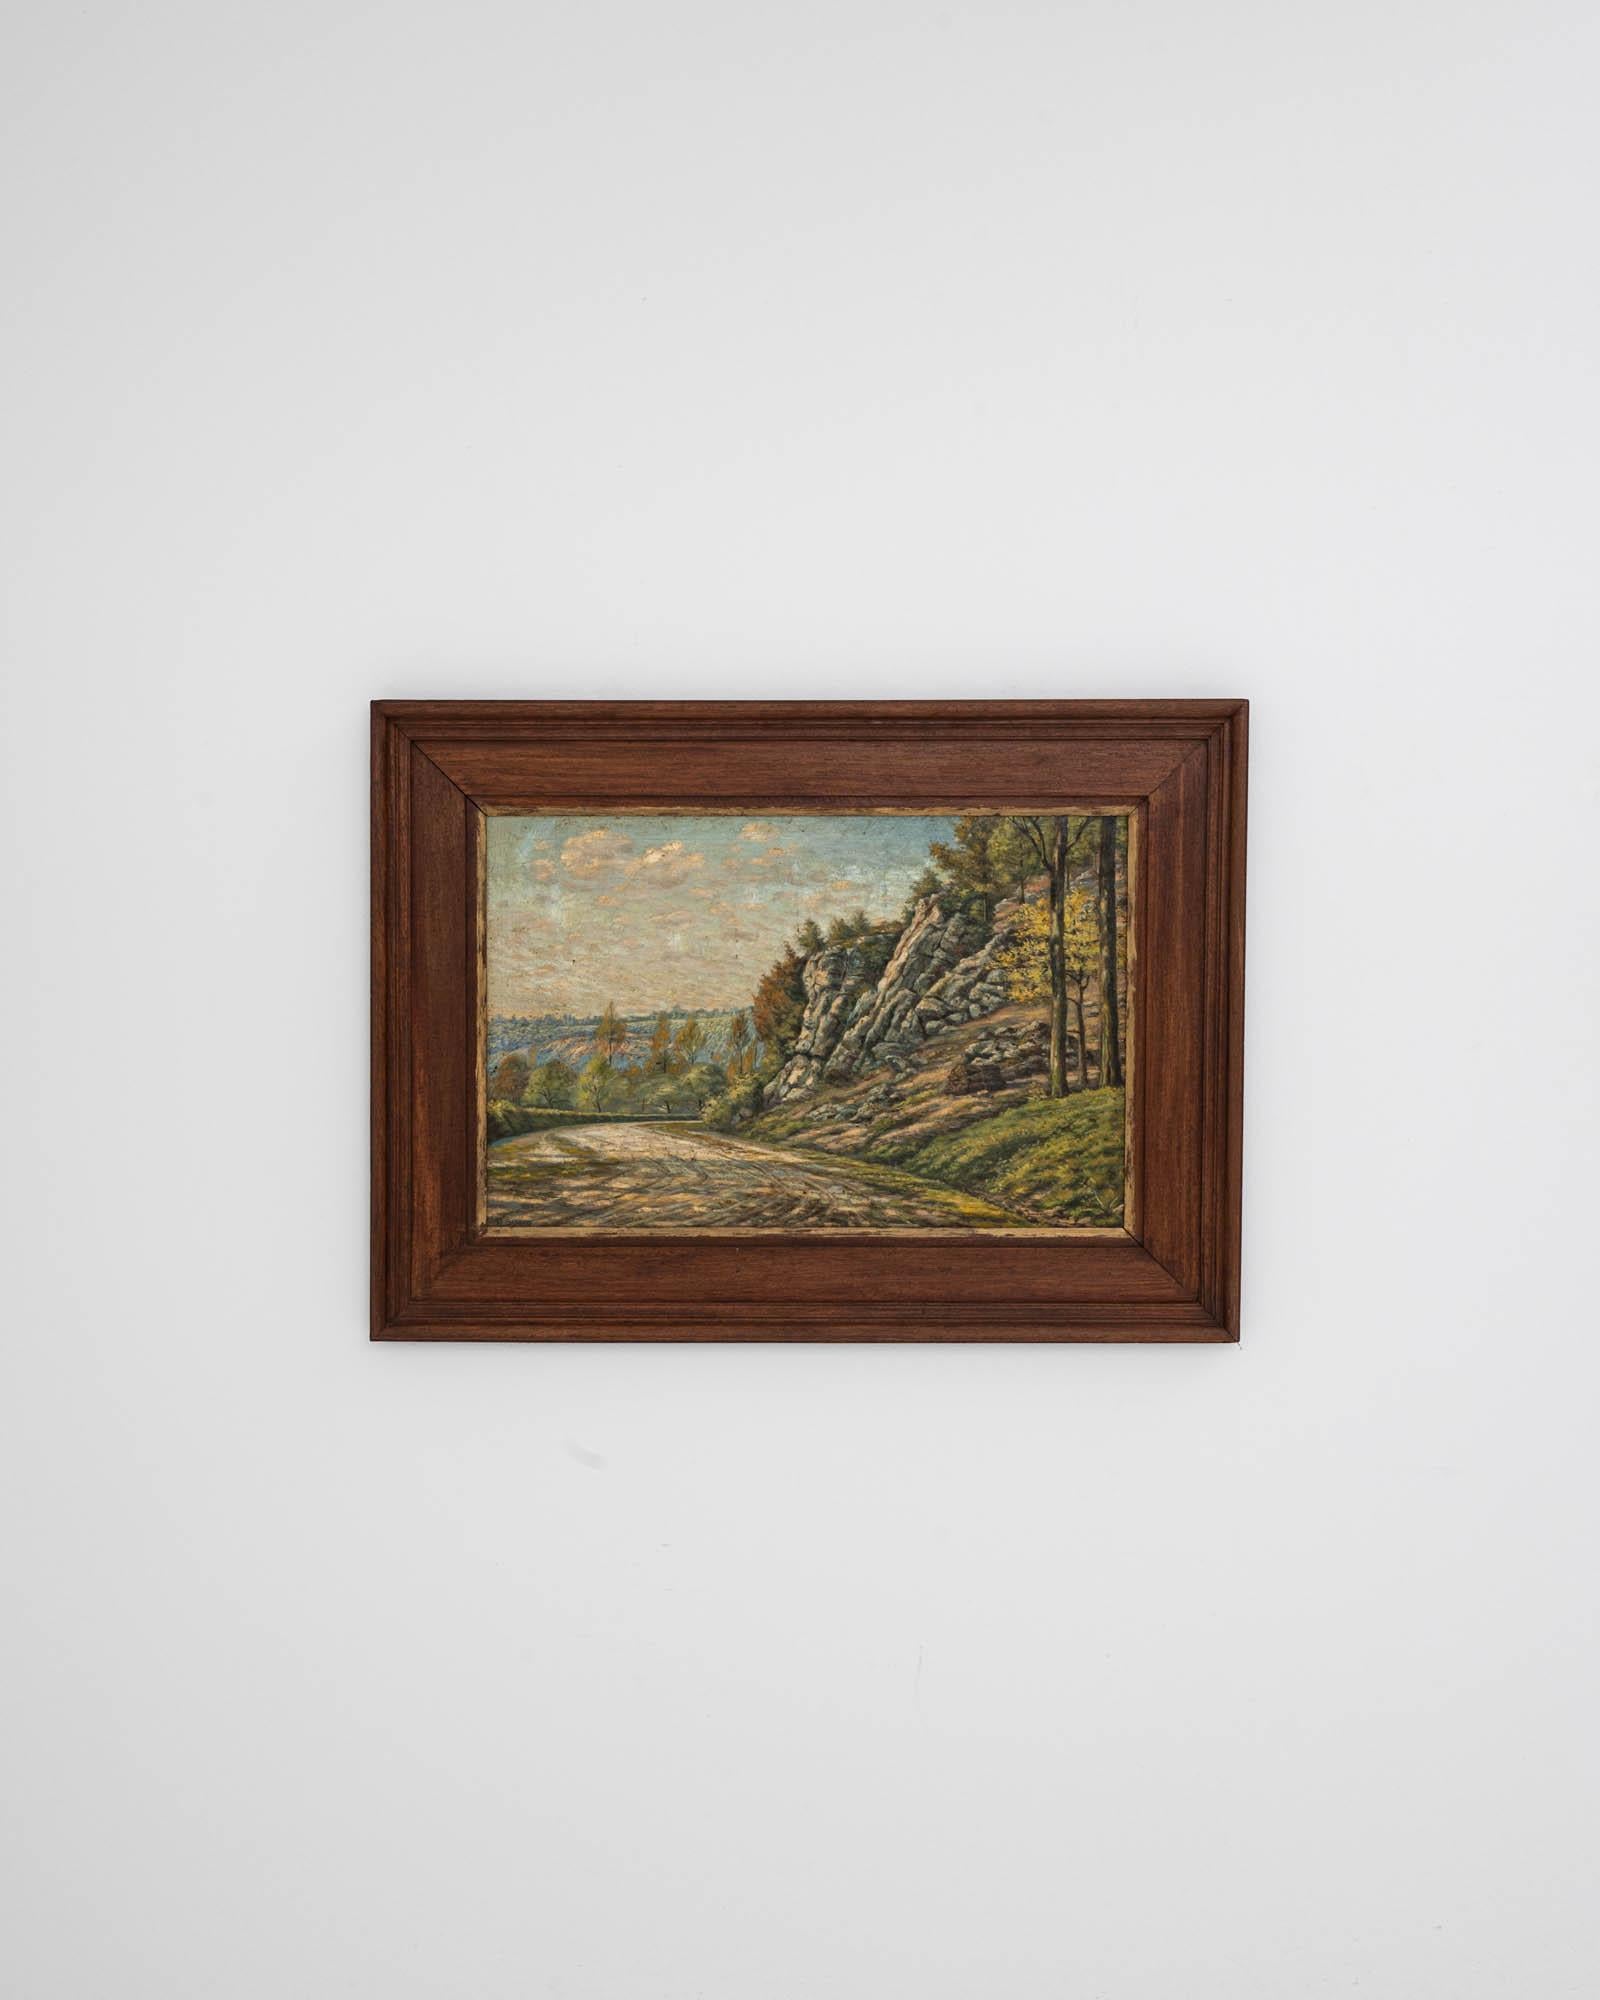 Enclosed within an elegant, large wooden frame, this 20th-century painting portrays a tranquil landscape with an open village road winding through vast fields and trees, likely in Belgium, this artwork’s place of origin. The depiction of a clear